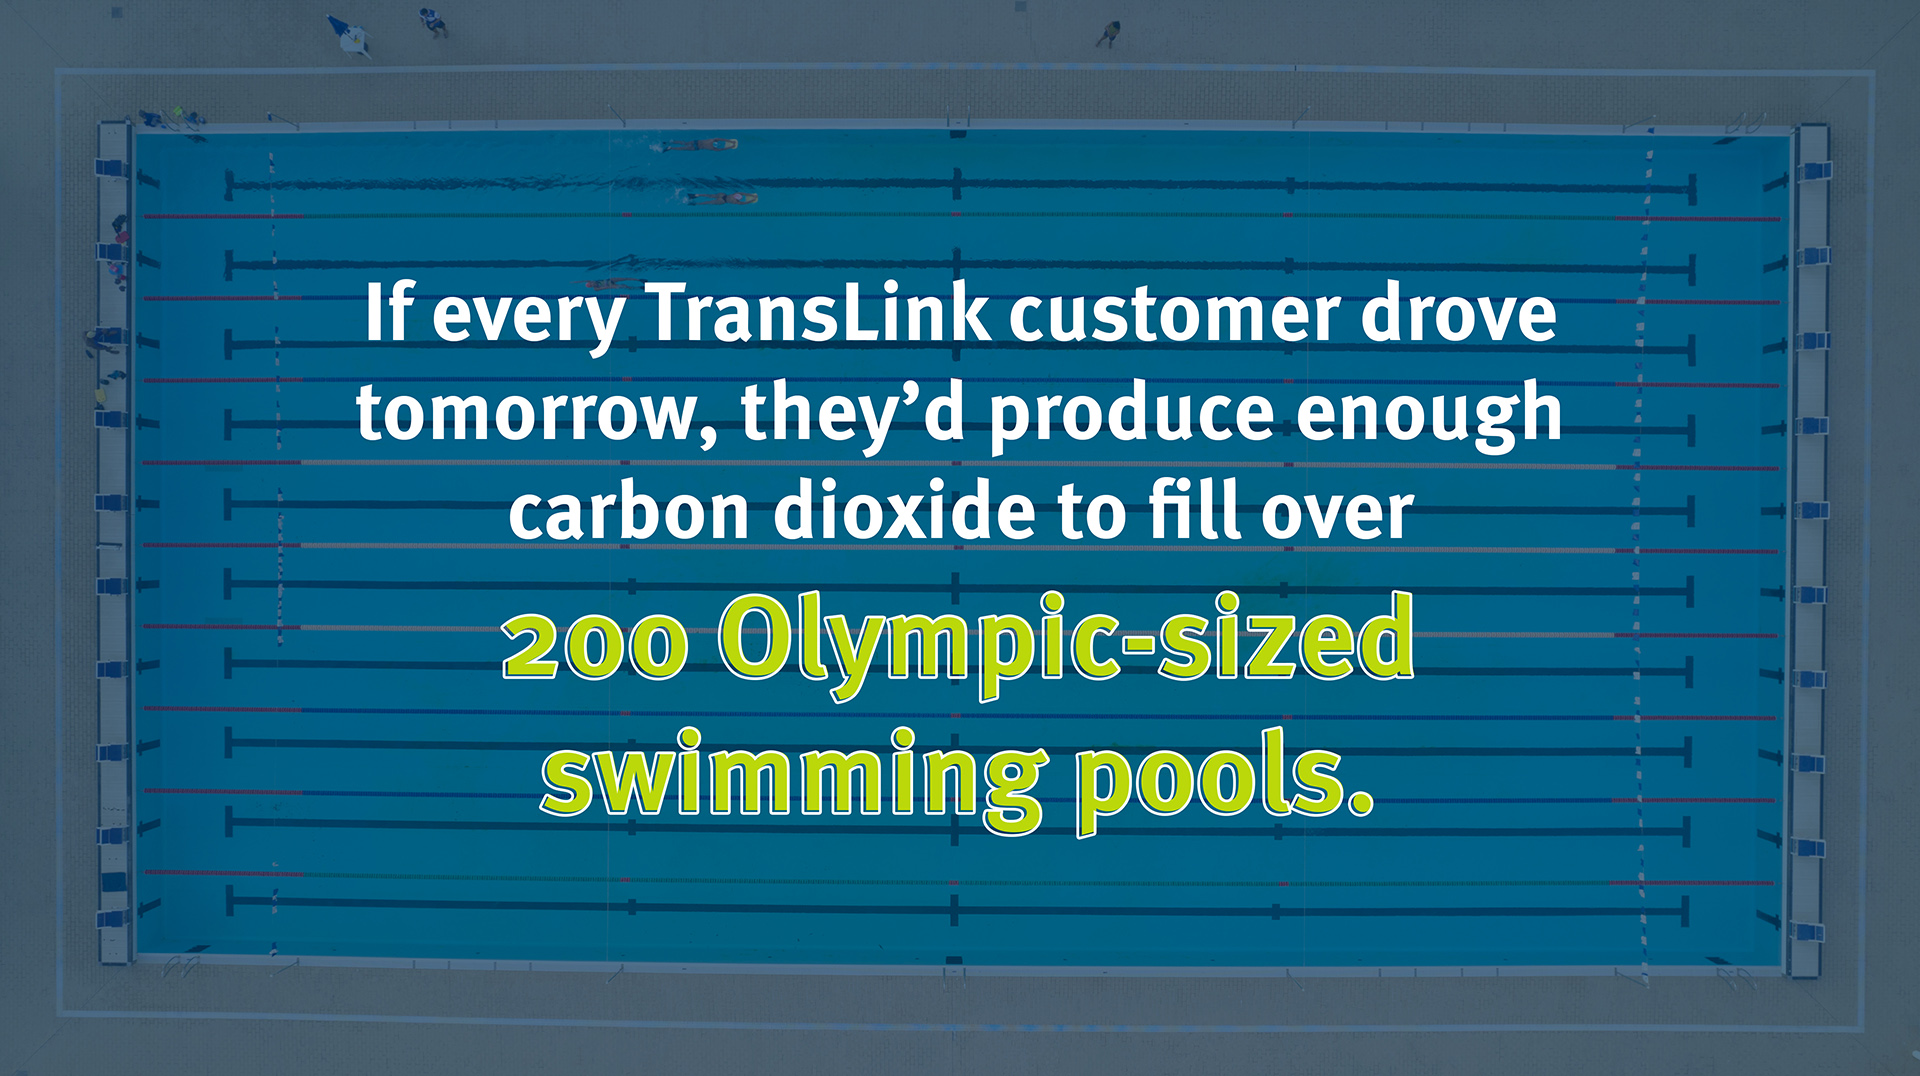 If every TransLink customer drove tomorrow, they'd produce enough CO2 to fill over 200 Olympic-sized swimming pools.